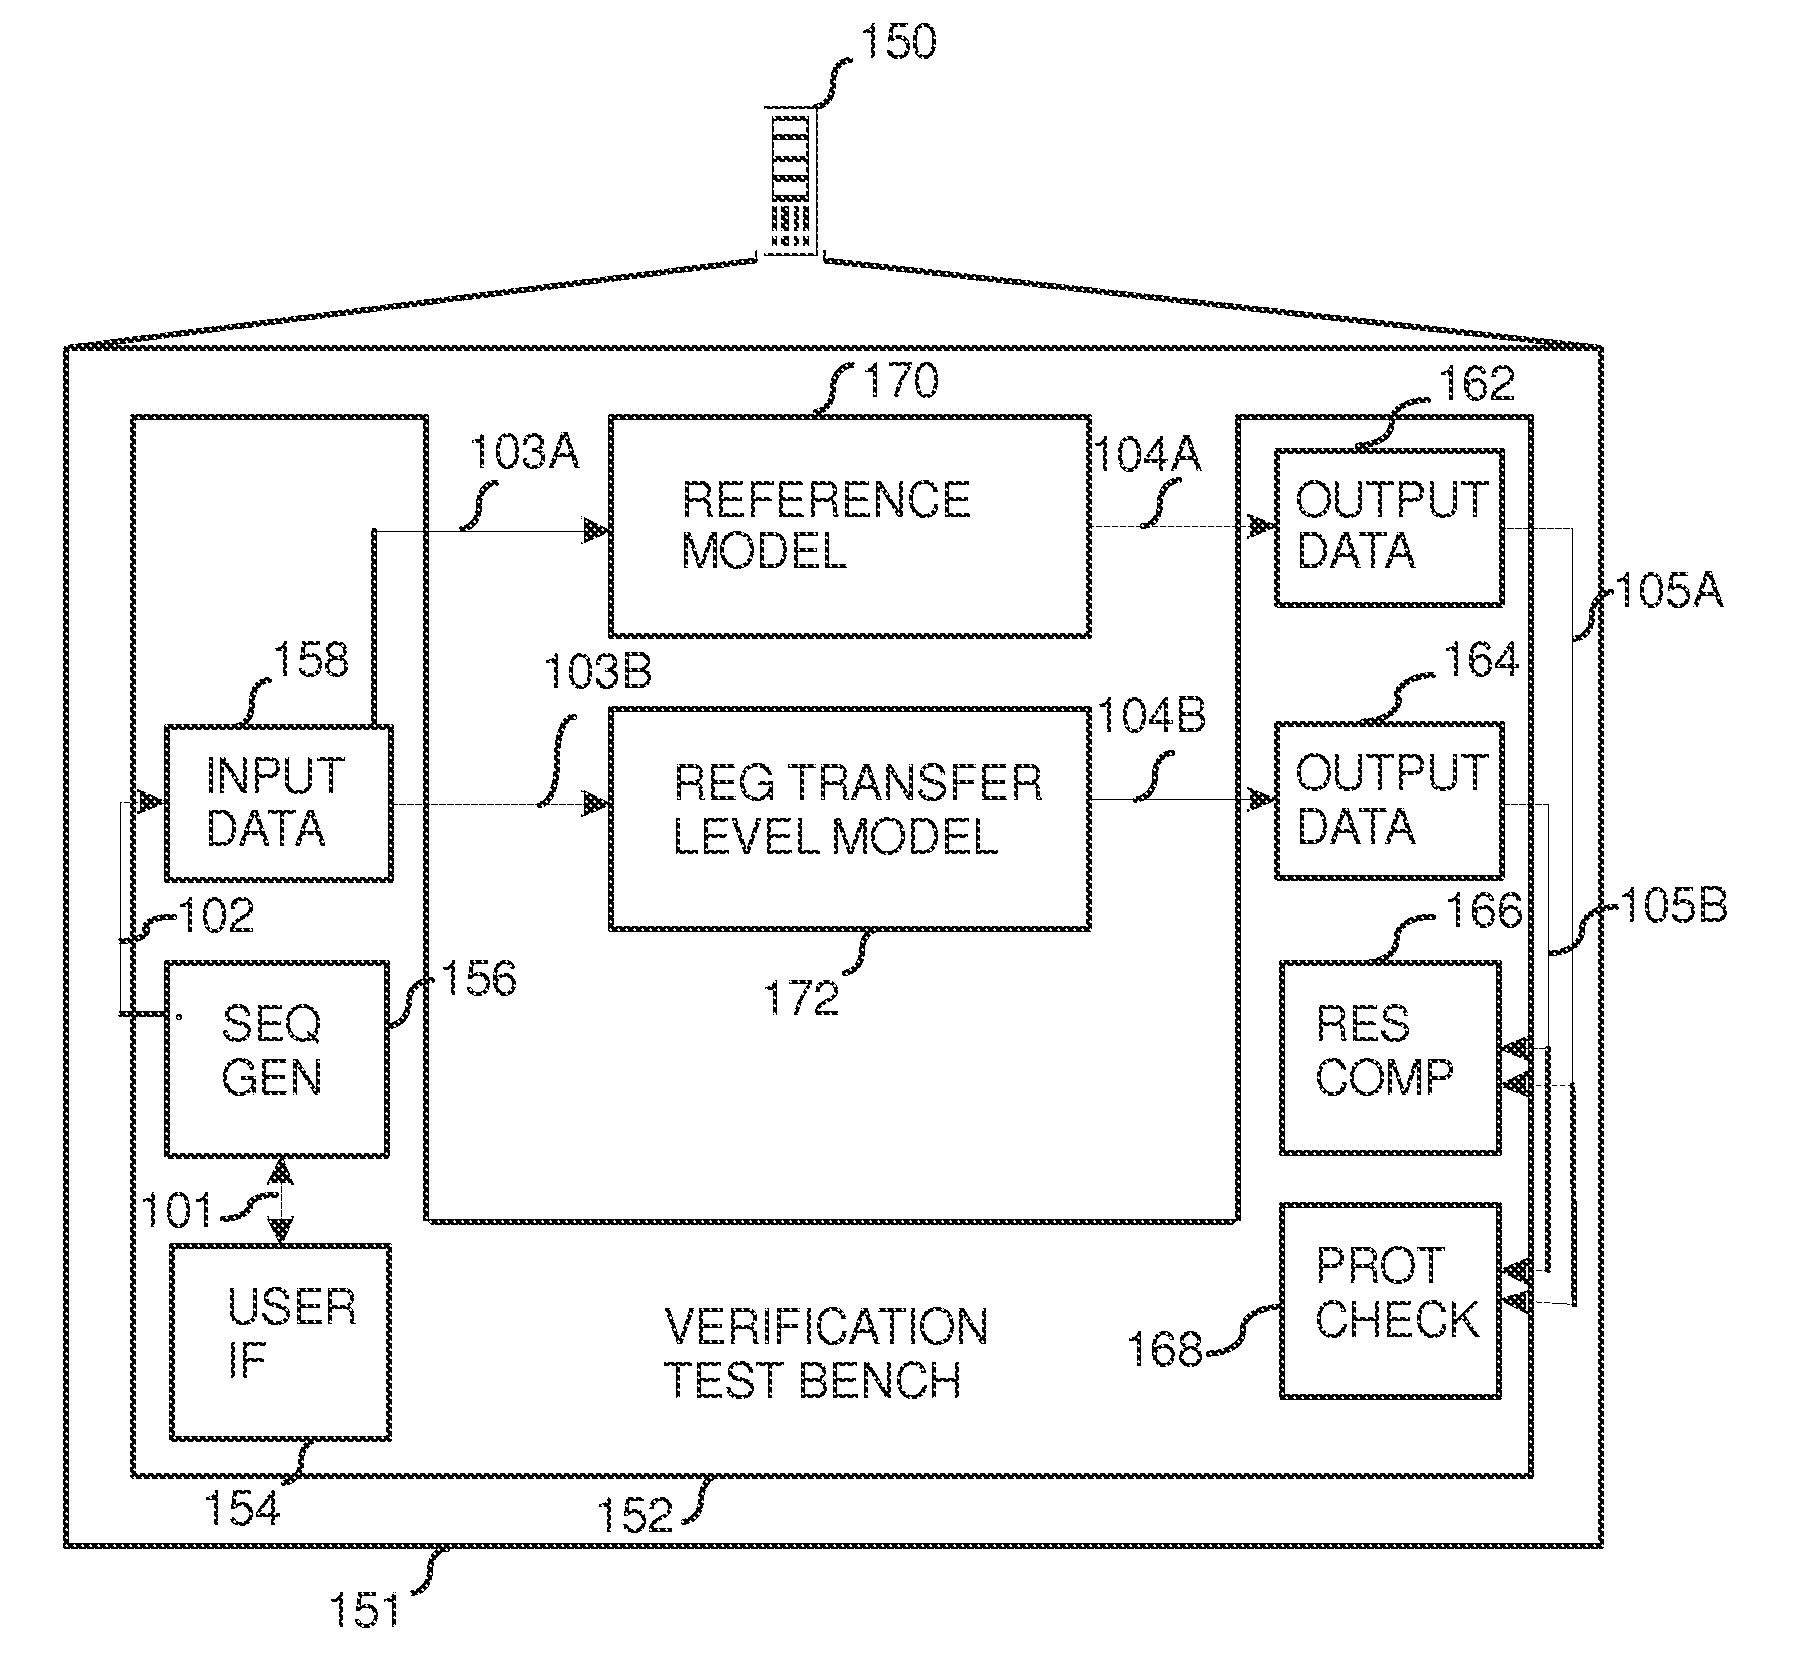 Method for integrated circuit design verification in a verification environment